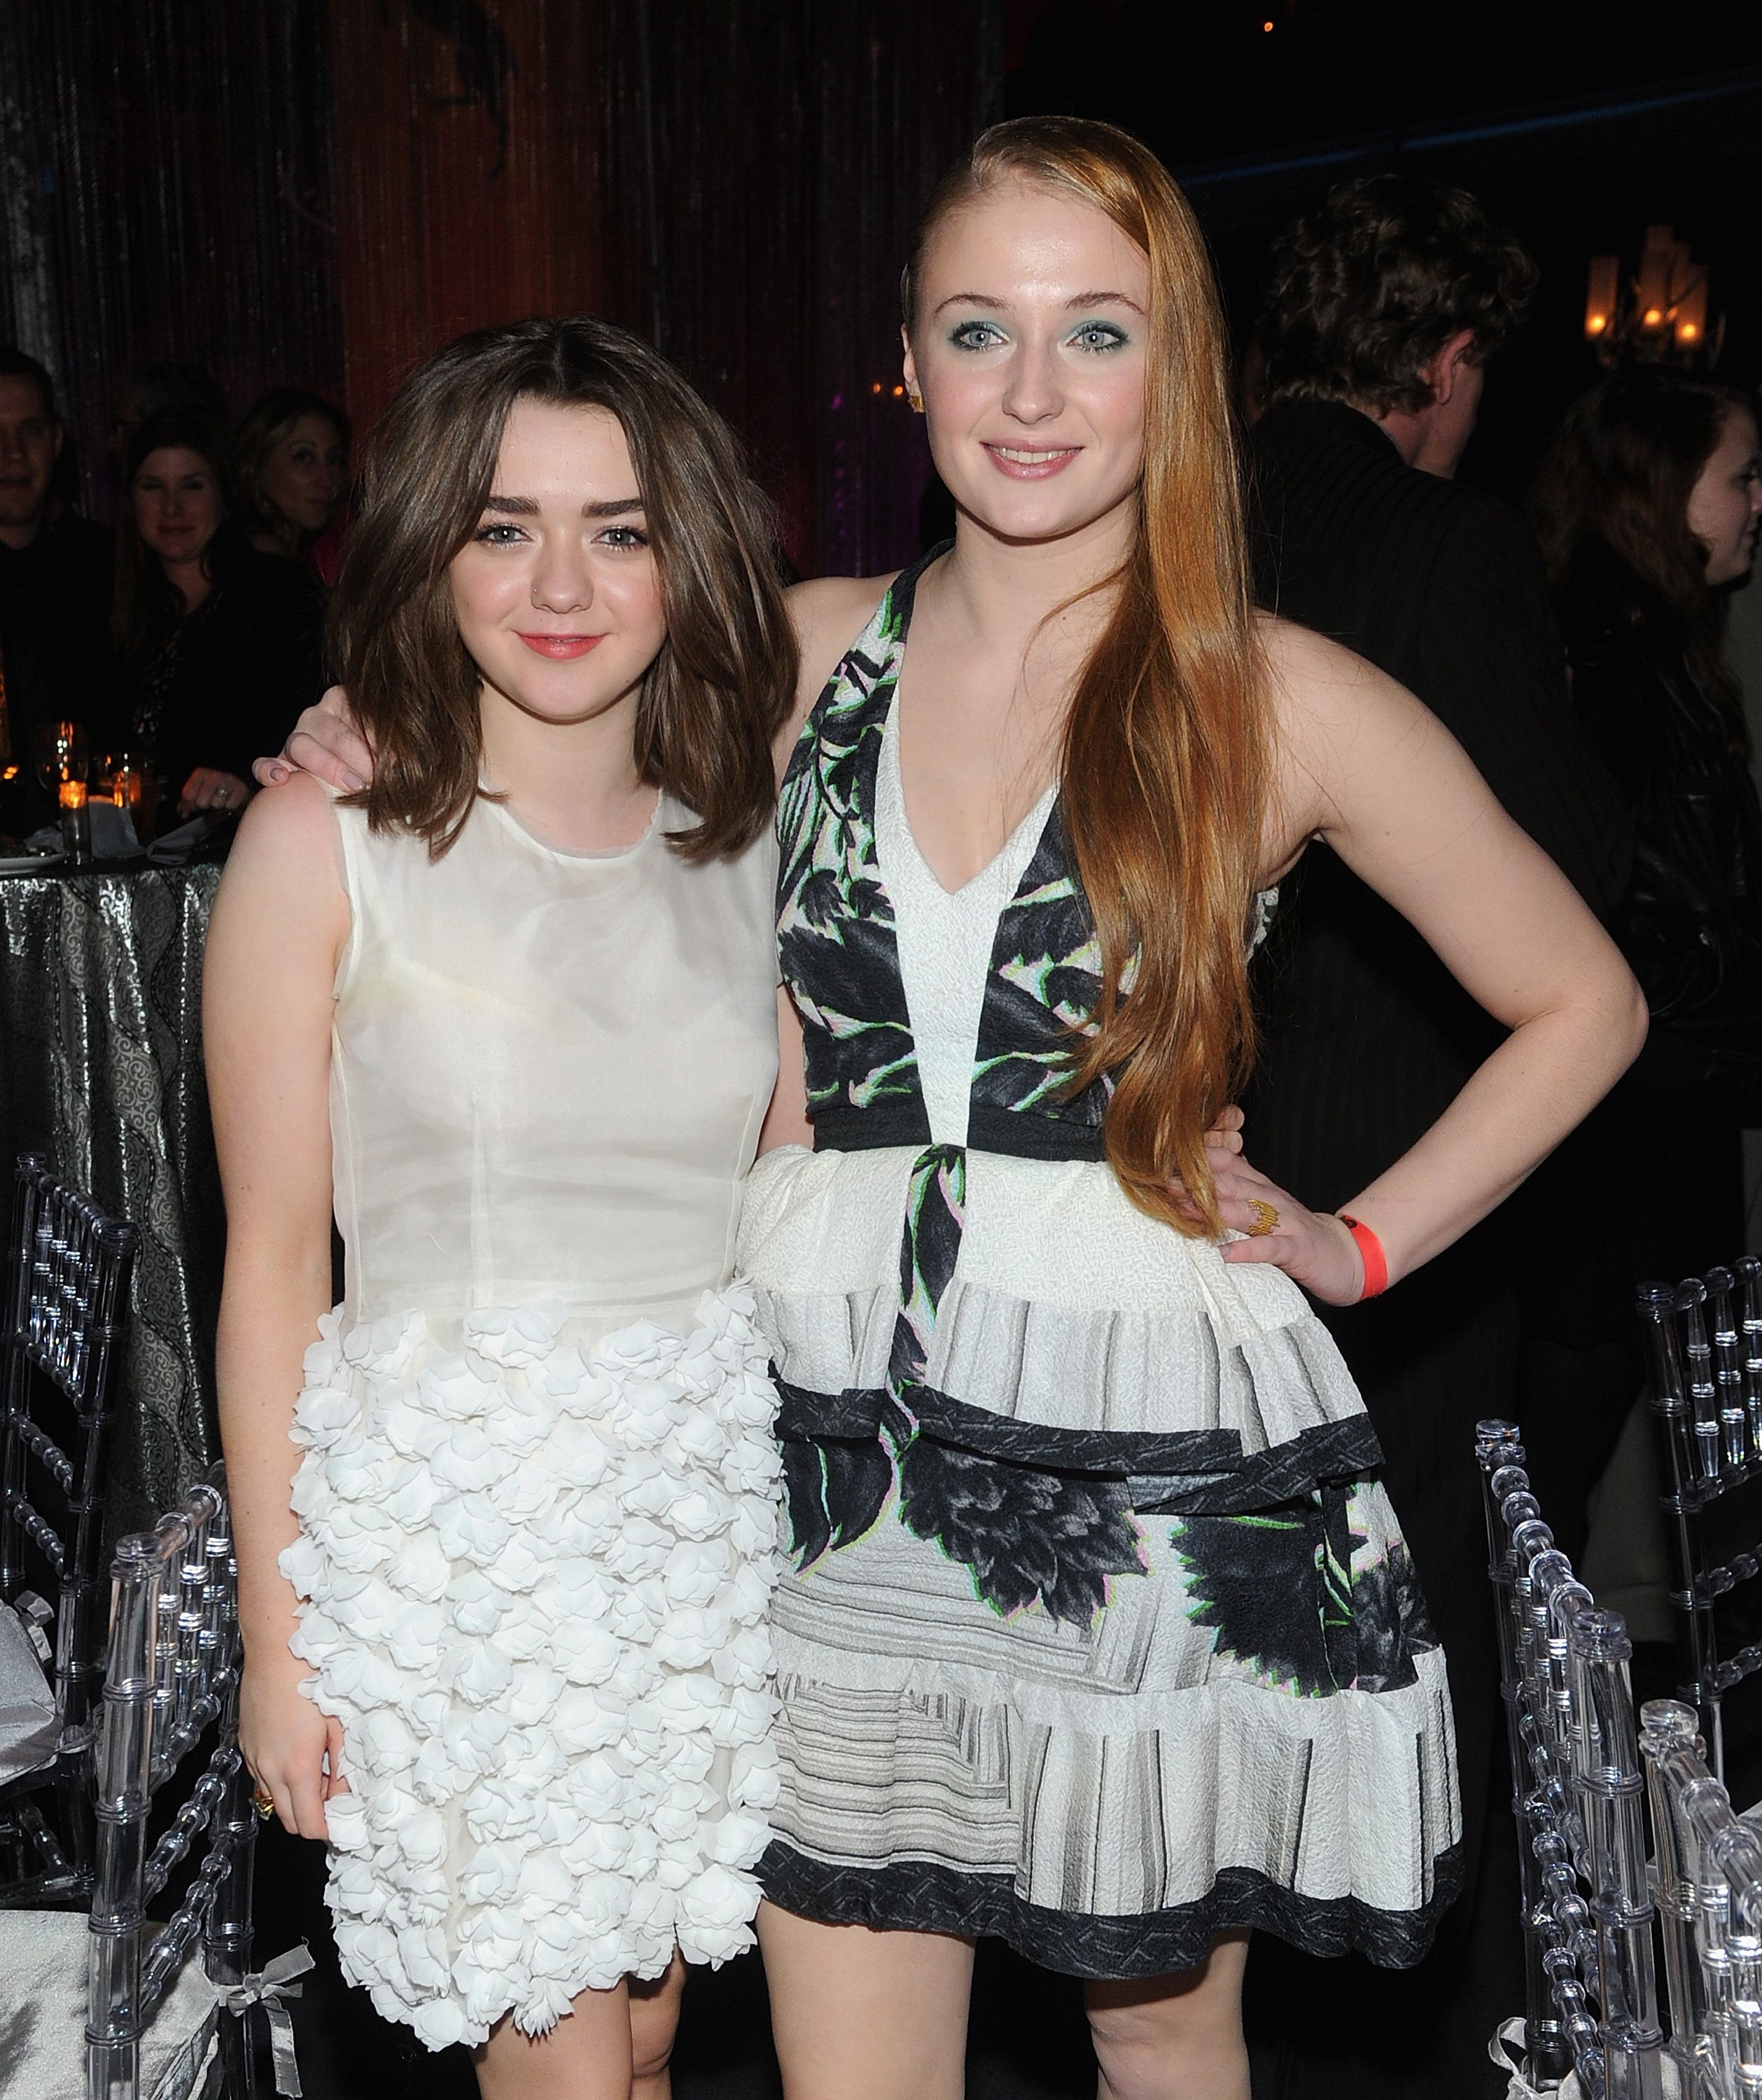 Maisie Williams Said She and Sophie Turner Try to Hang out When in